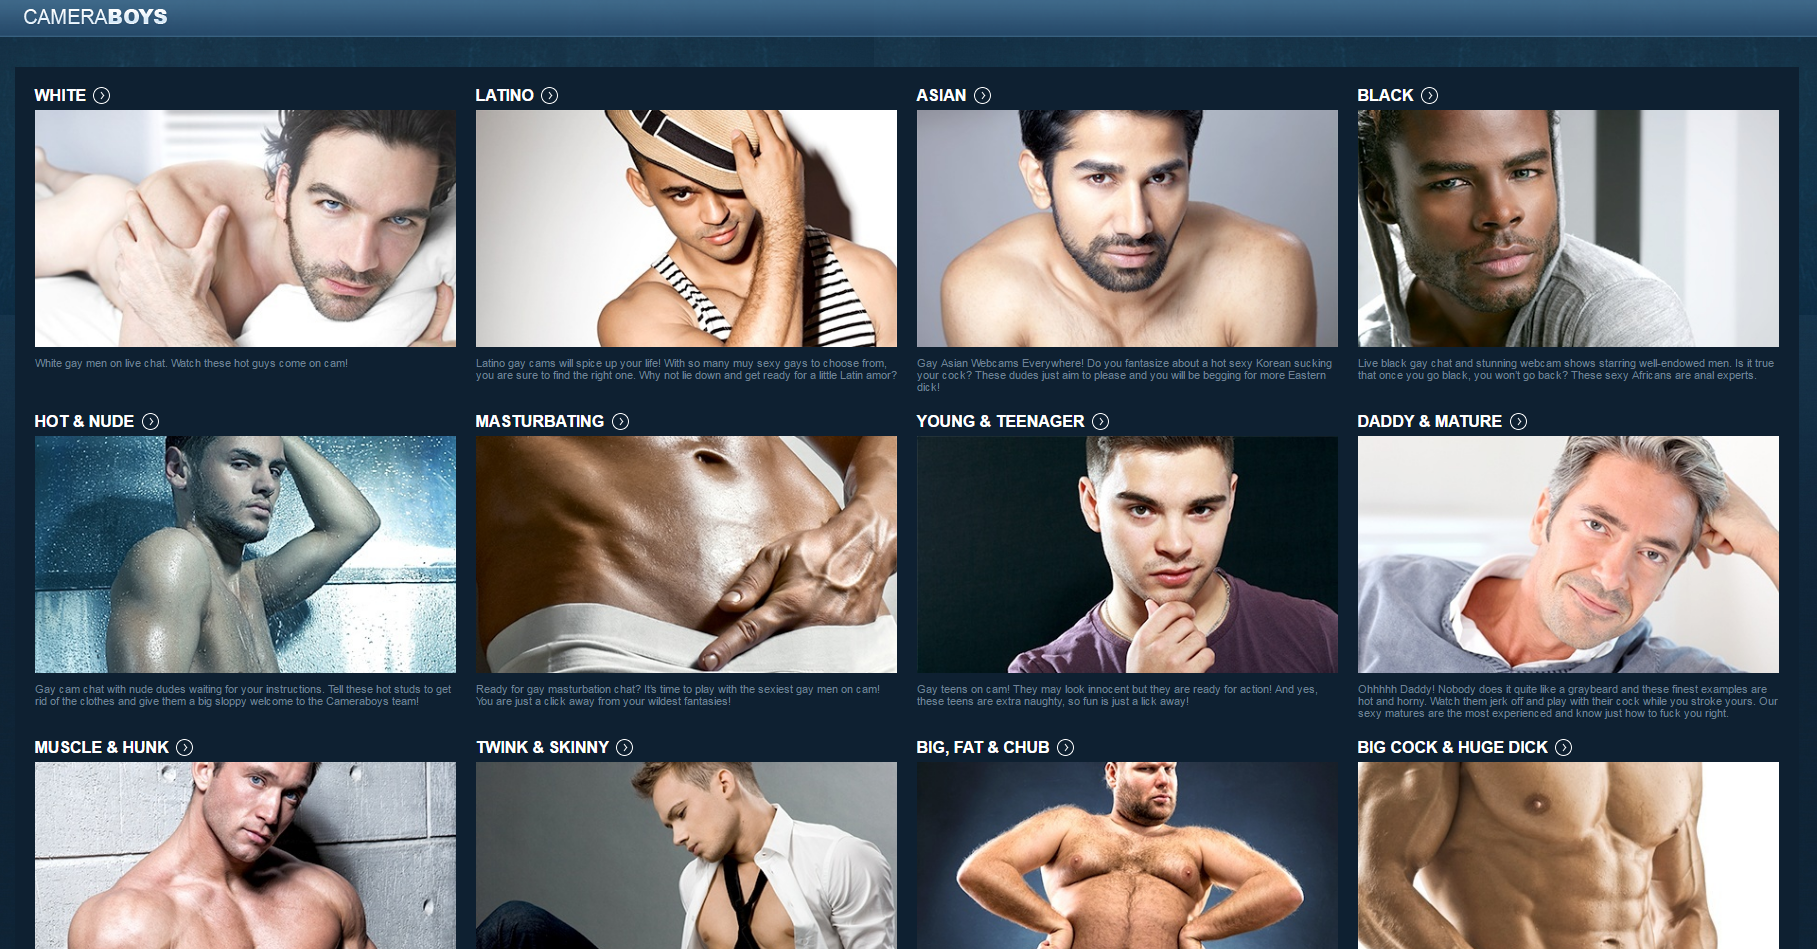 cameraboys.com best male cams